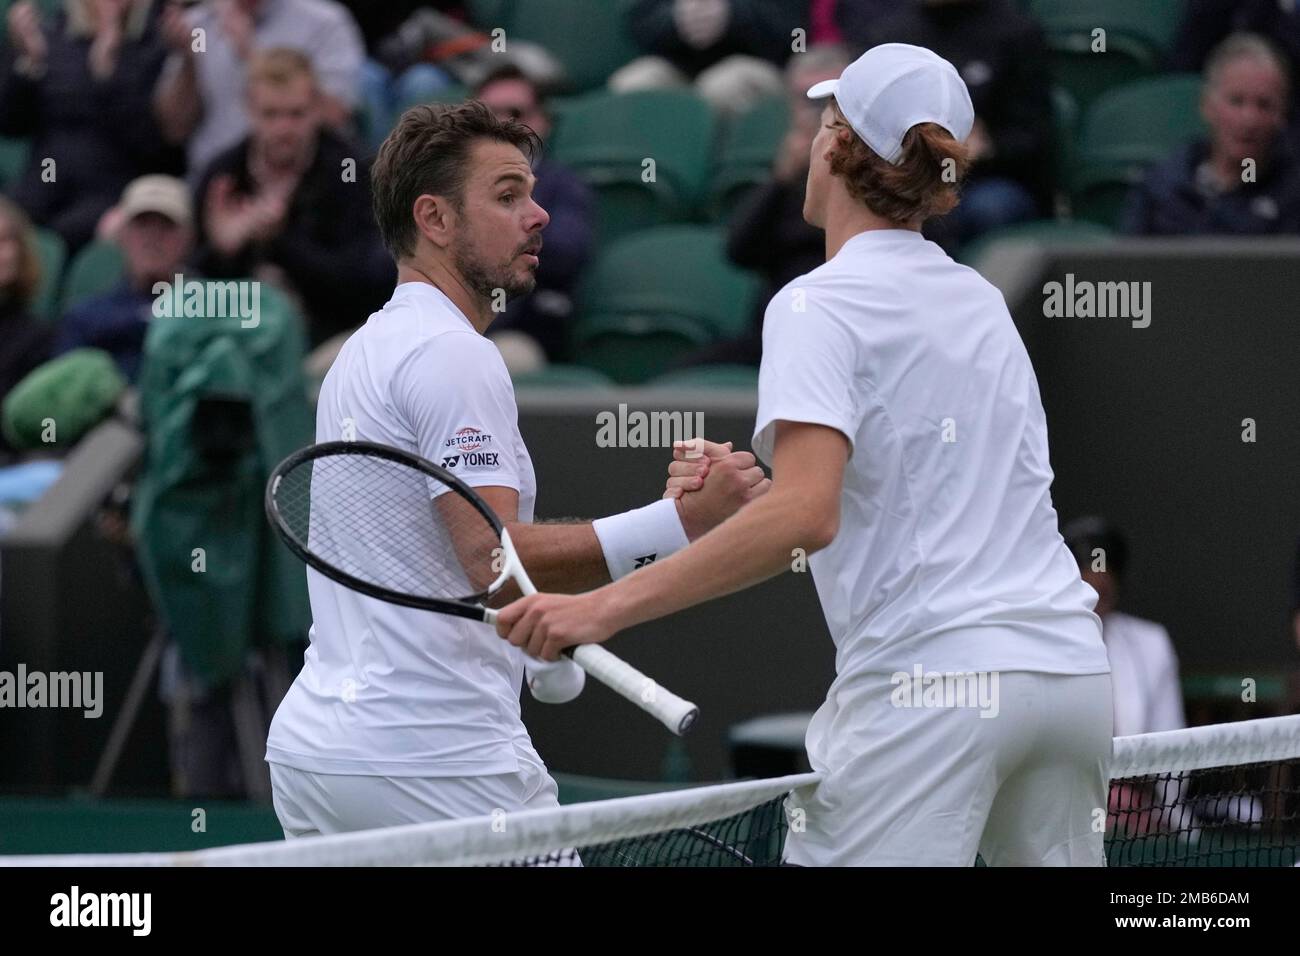 Italys Jannik Sinner, right, shakes hands with Switzerlands Stan Wawrinka after defeating him in their mens singles match on day one of the Wimbledon tennis championships in London, Monday, June 27, 2022